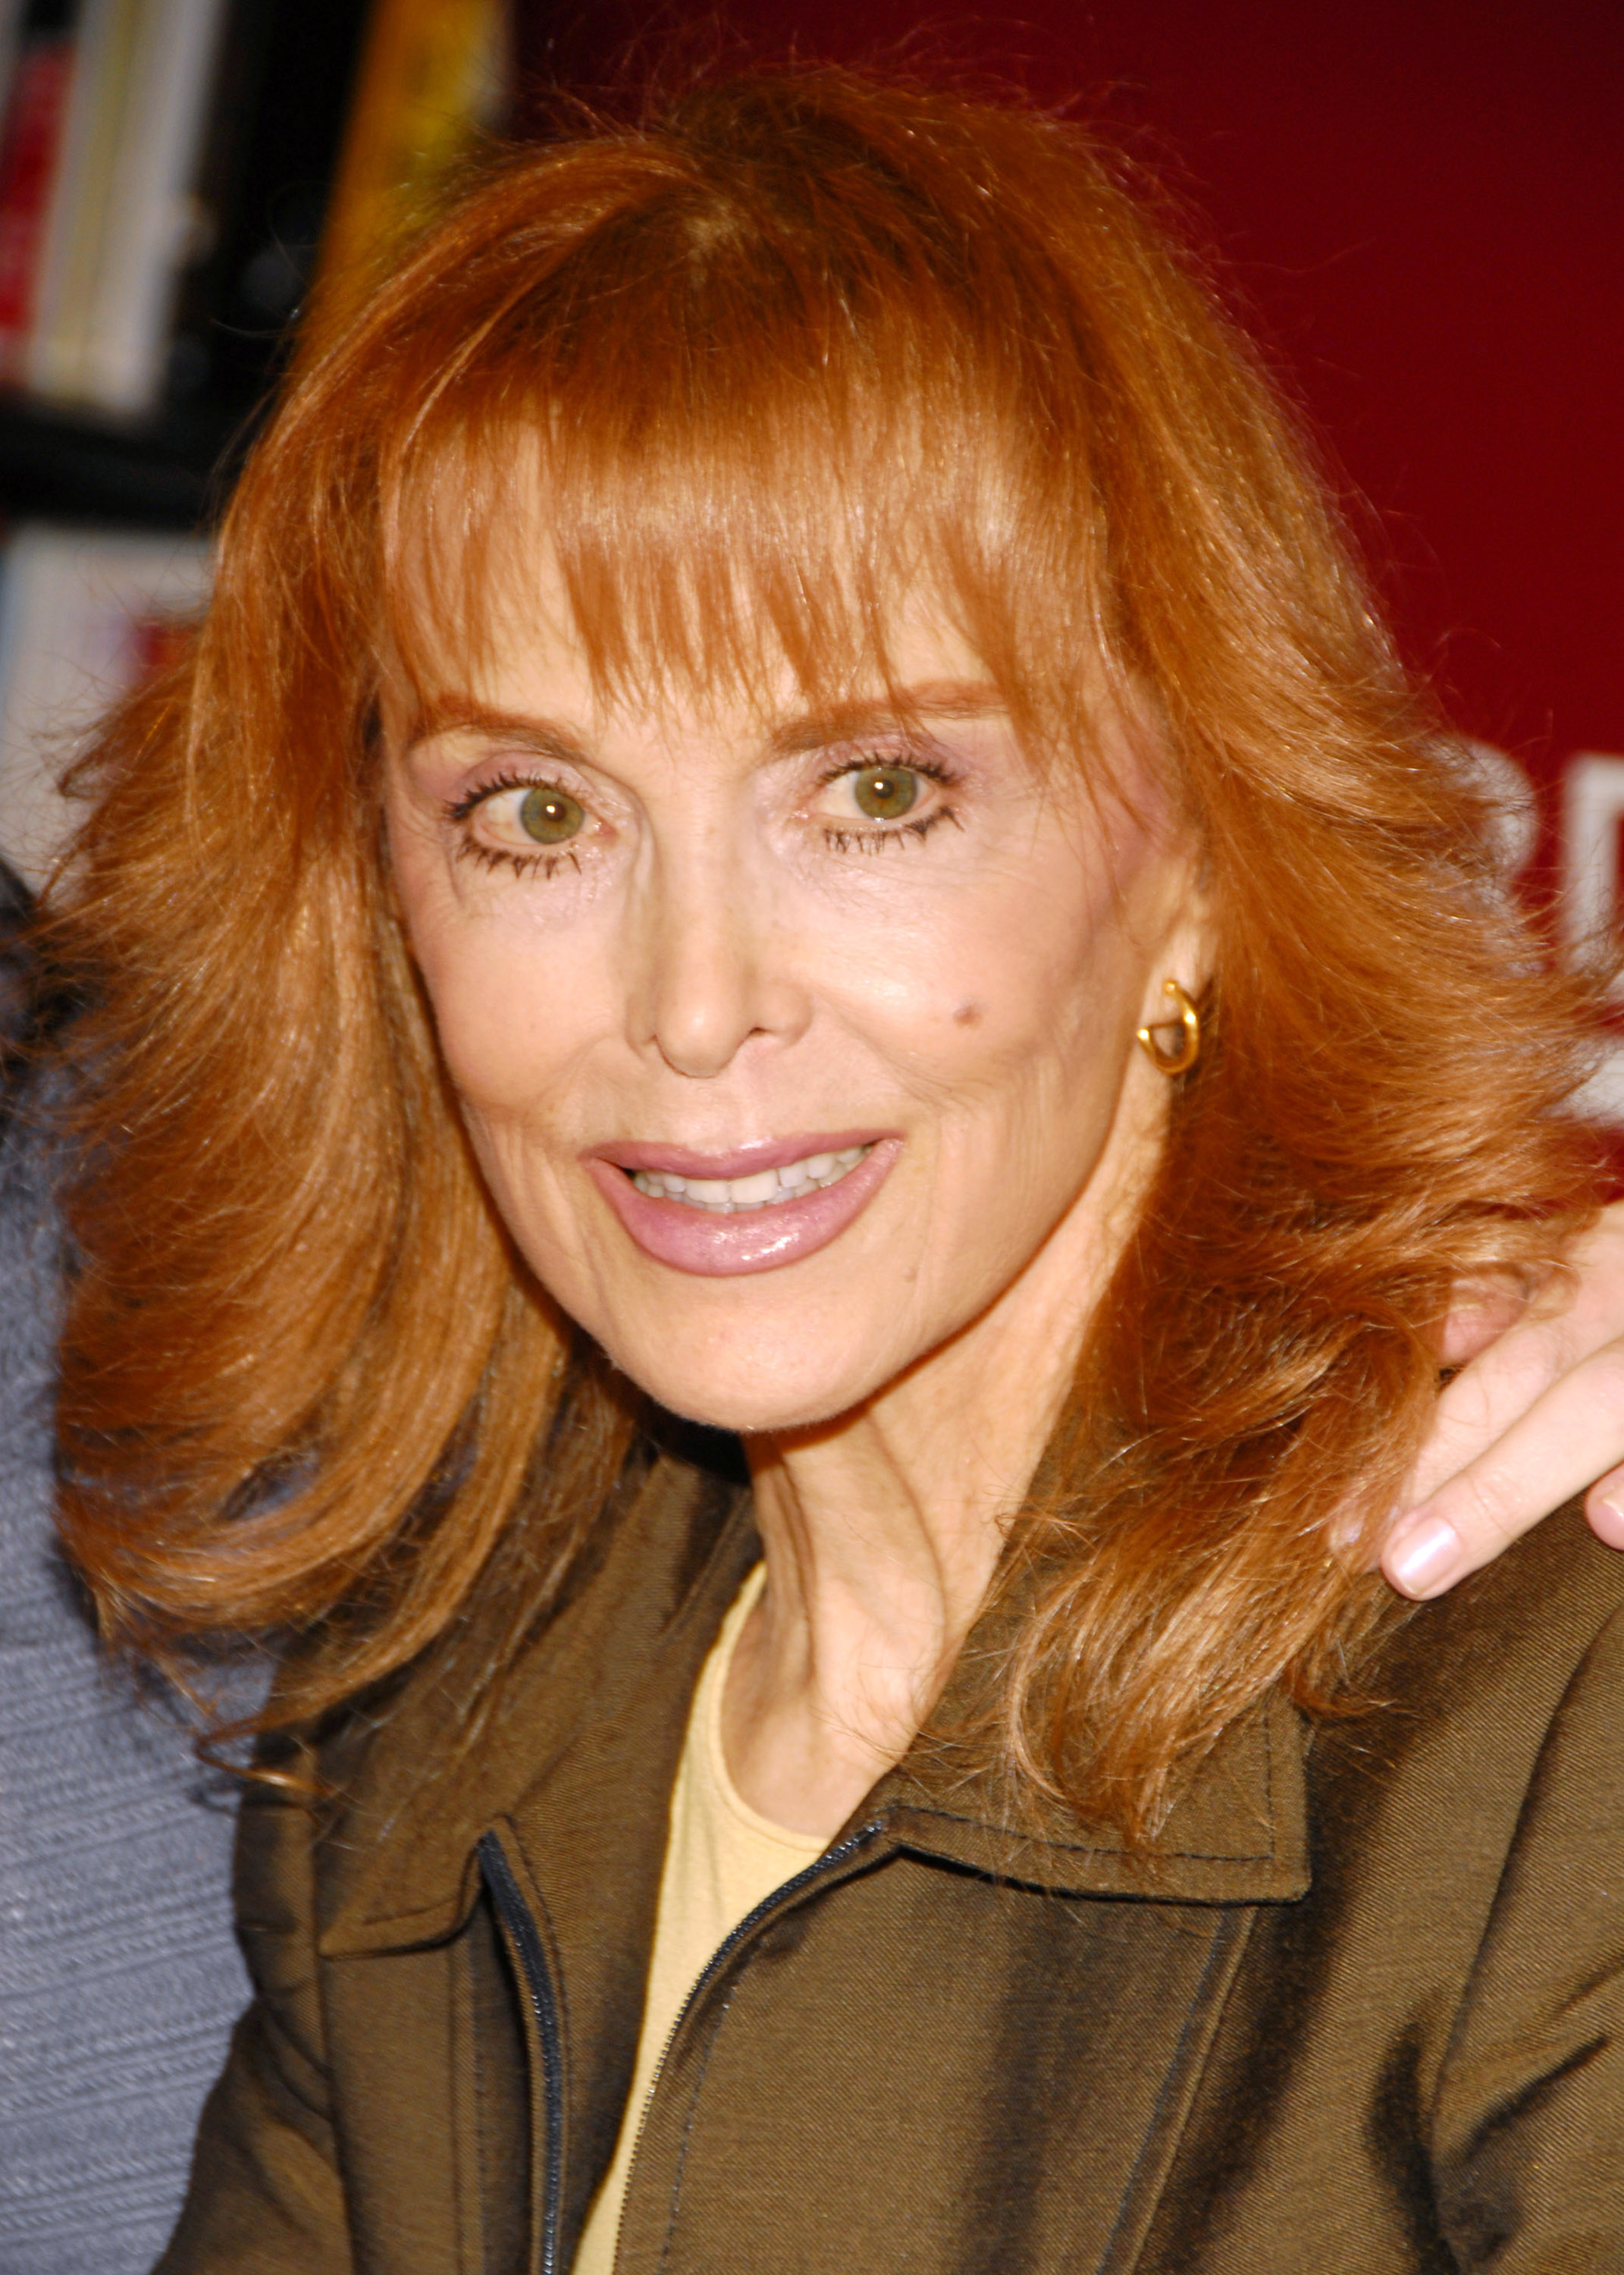 Tina Louise during the signing of her book, "When I Grow Up" on March 15, 2007 at Borders in New York City | Source: Getty Images